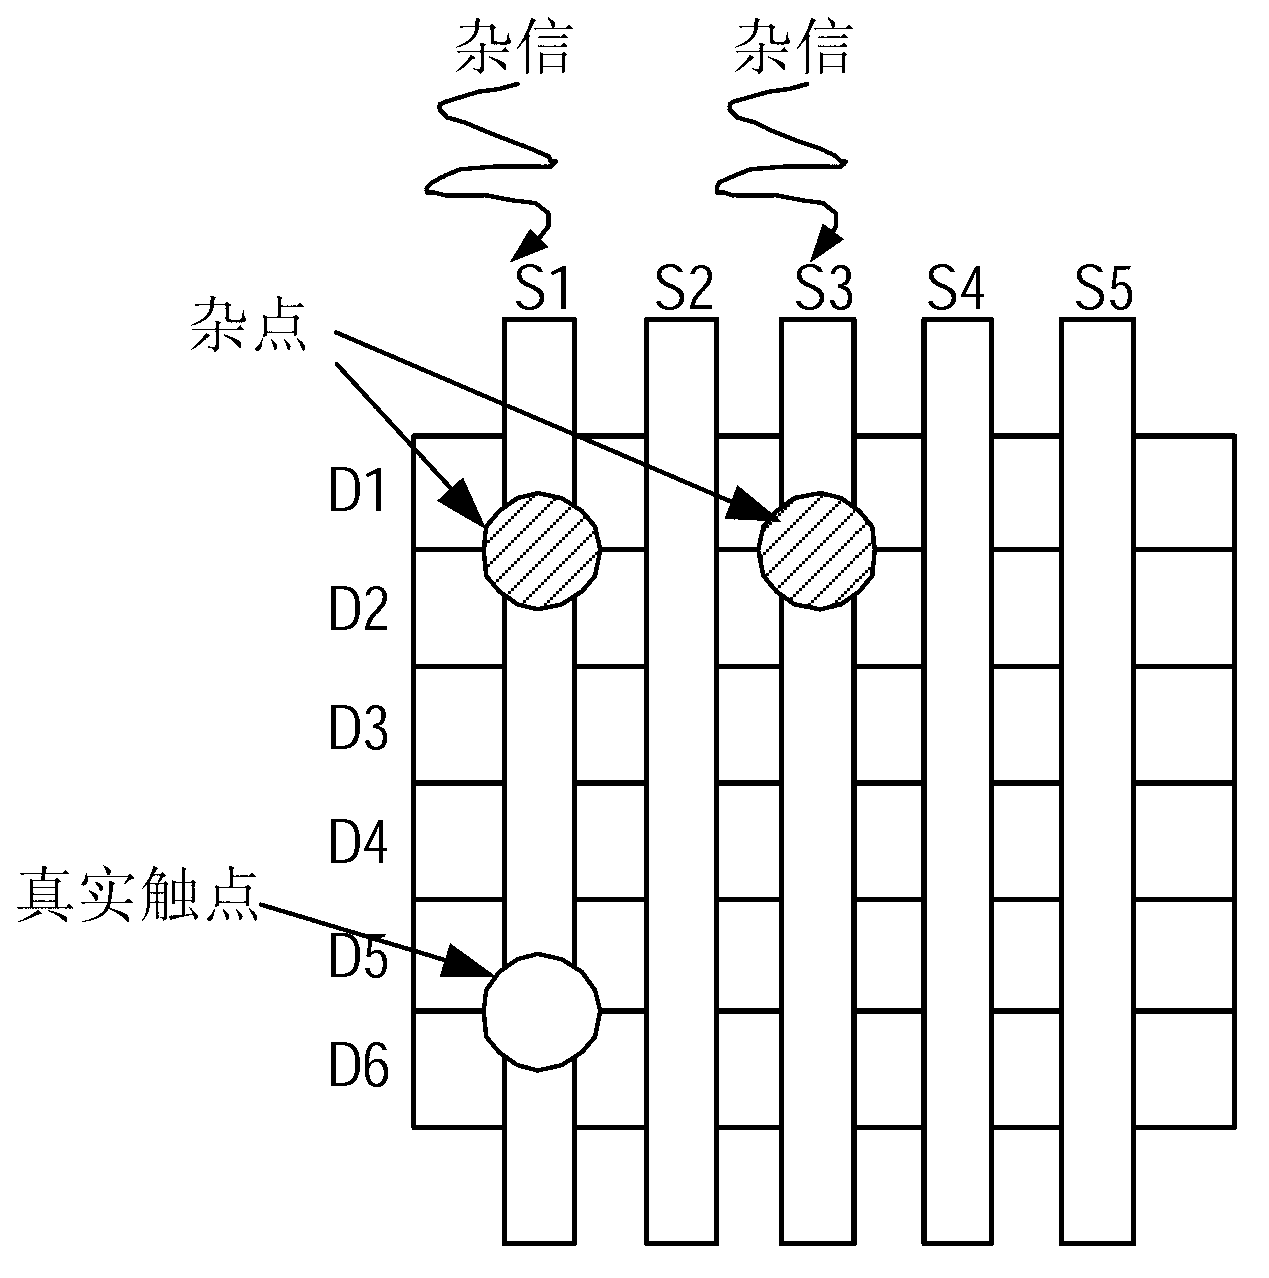 Method for removing touch noise through self-capacitance and mutual-capacitance induction alternate scanning